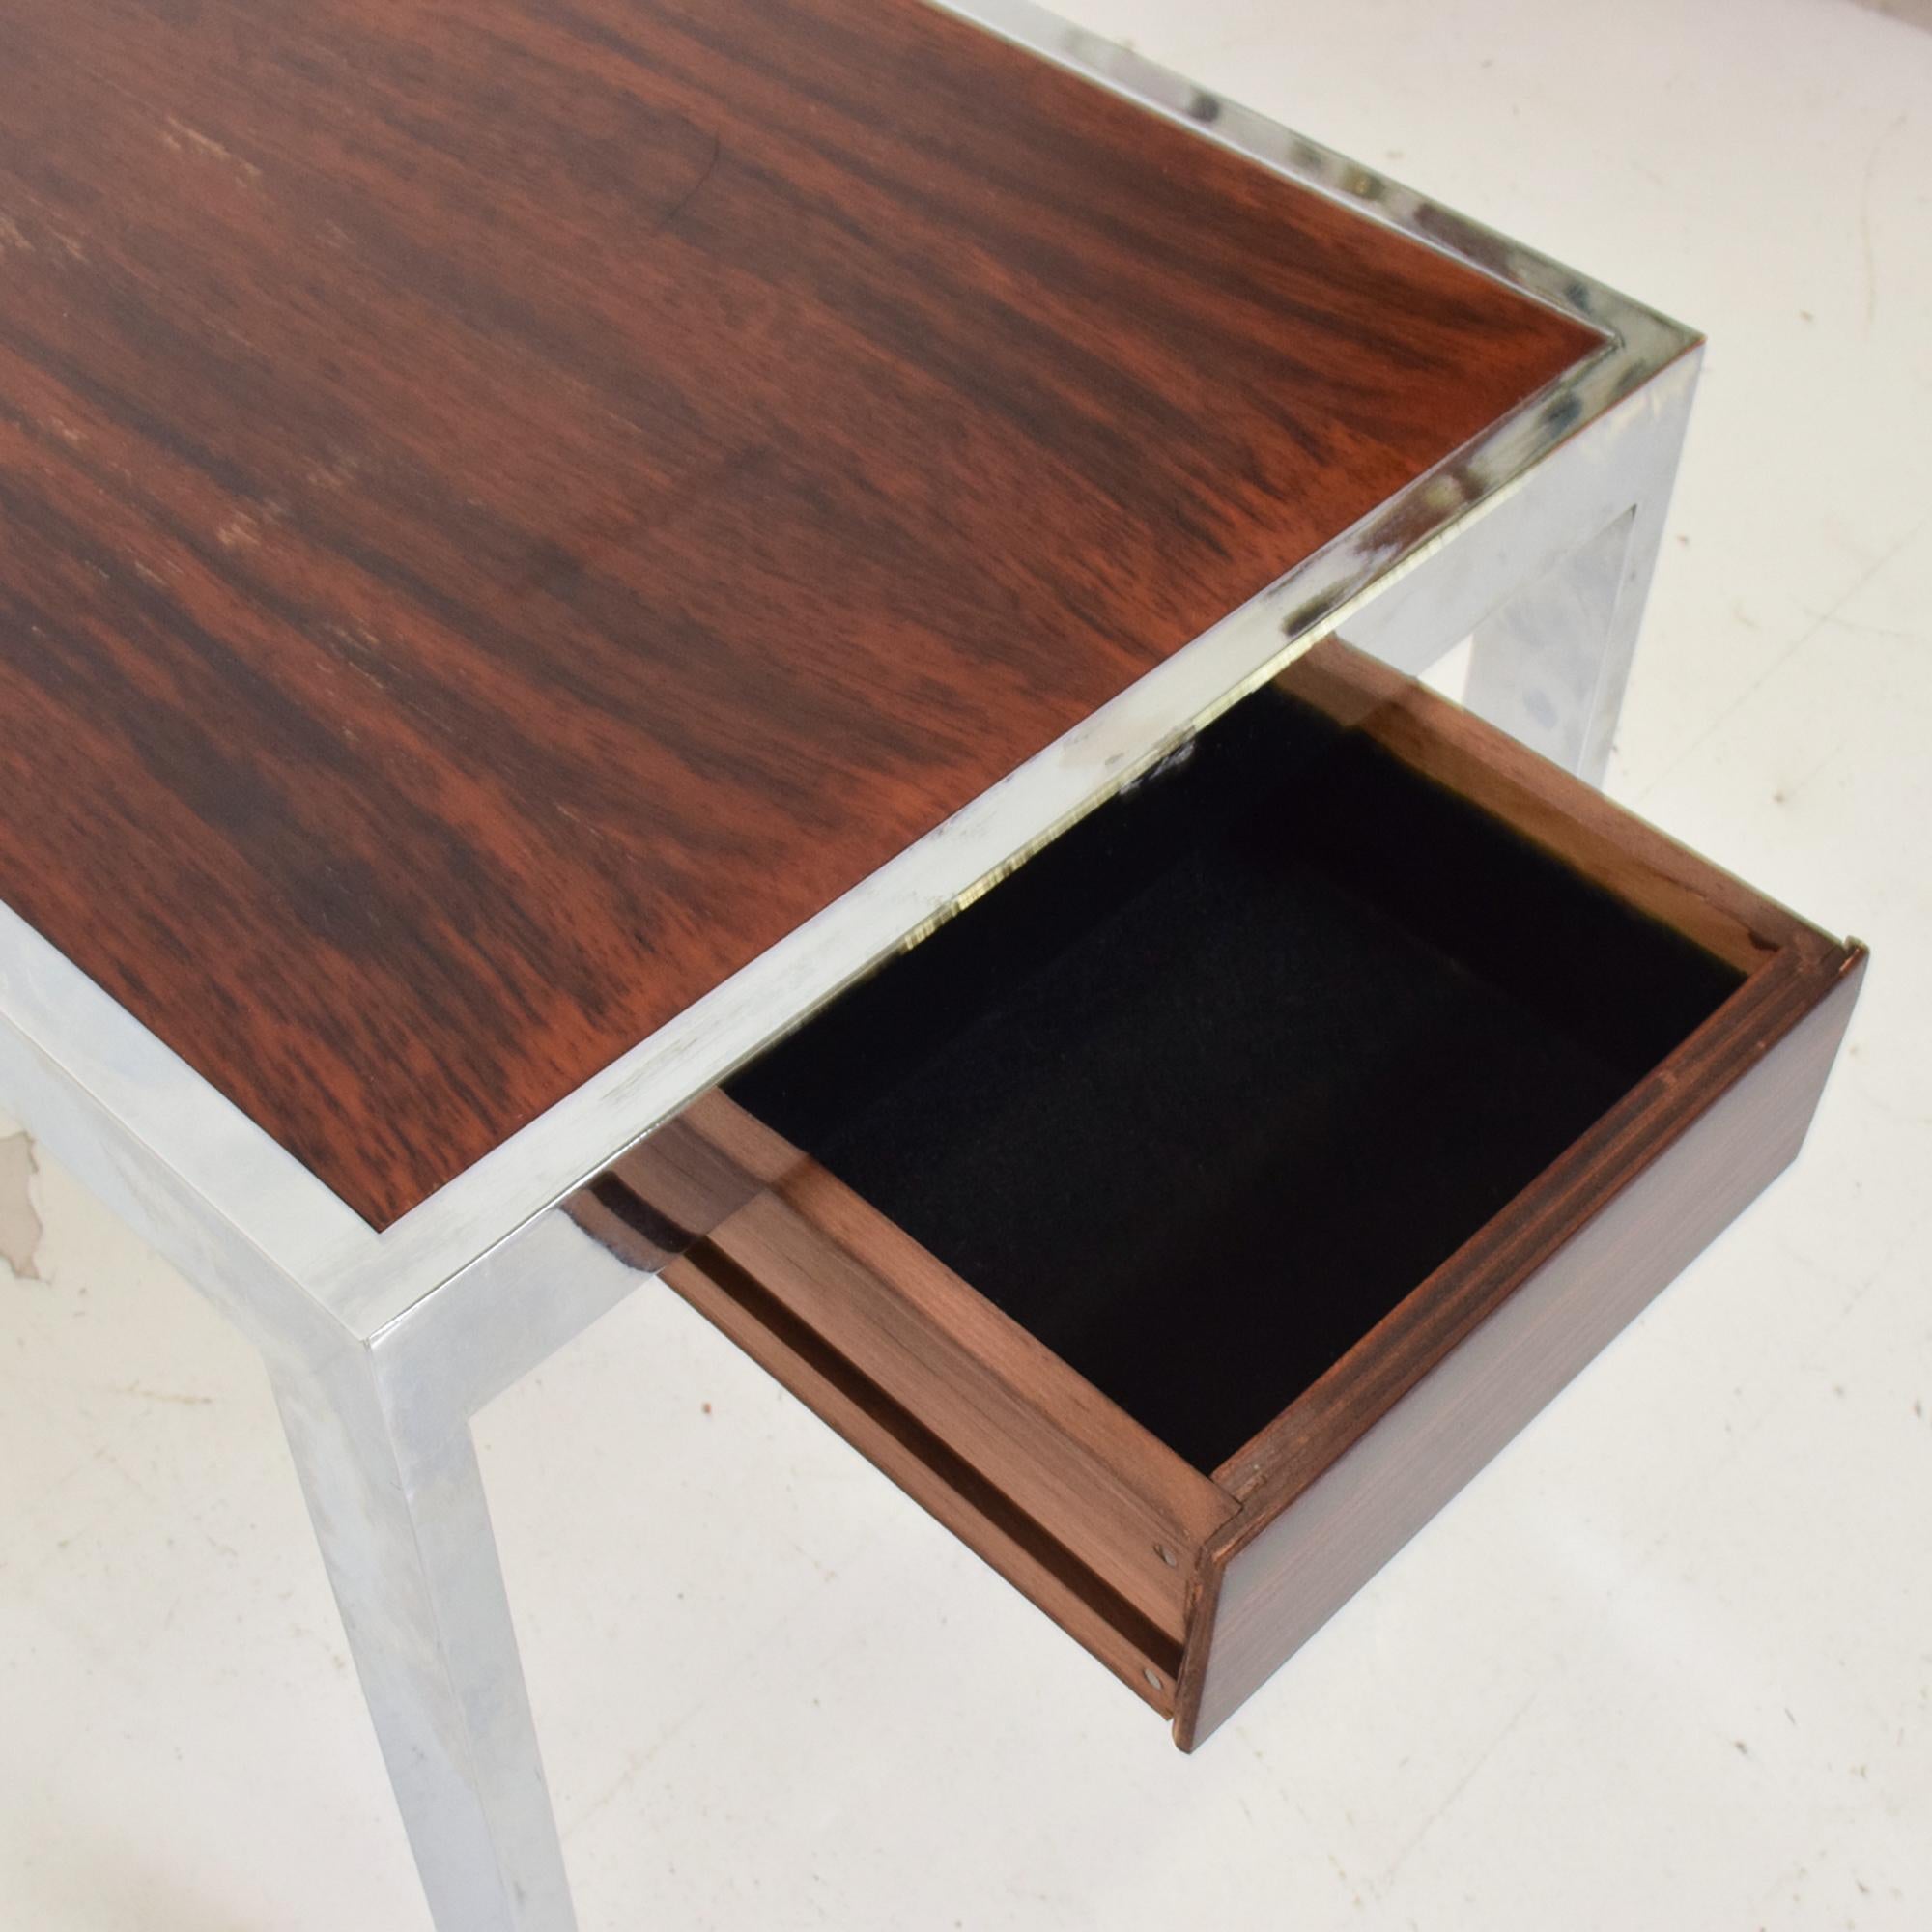 Mid-20th Century Sleek Rosewood & Chrome Rectangular Side Table on Rolling Casters 1960s Modern